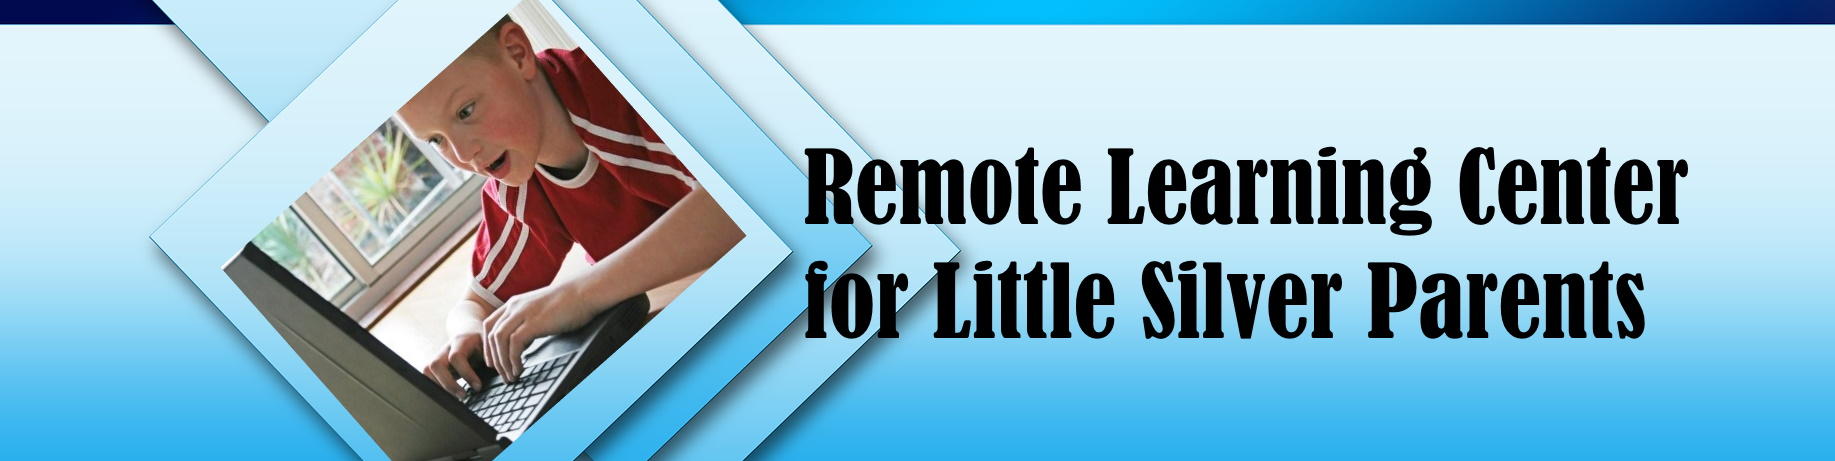 Remote Learning Center for Little Silver Parents